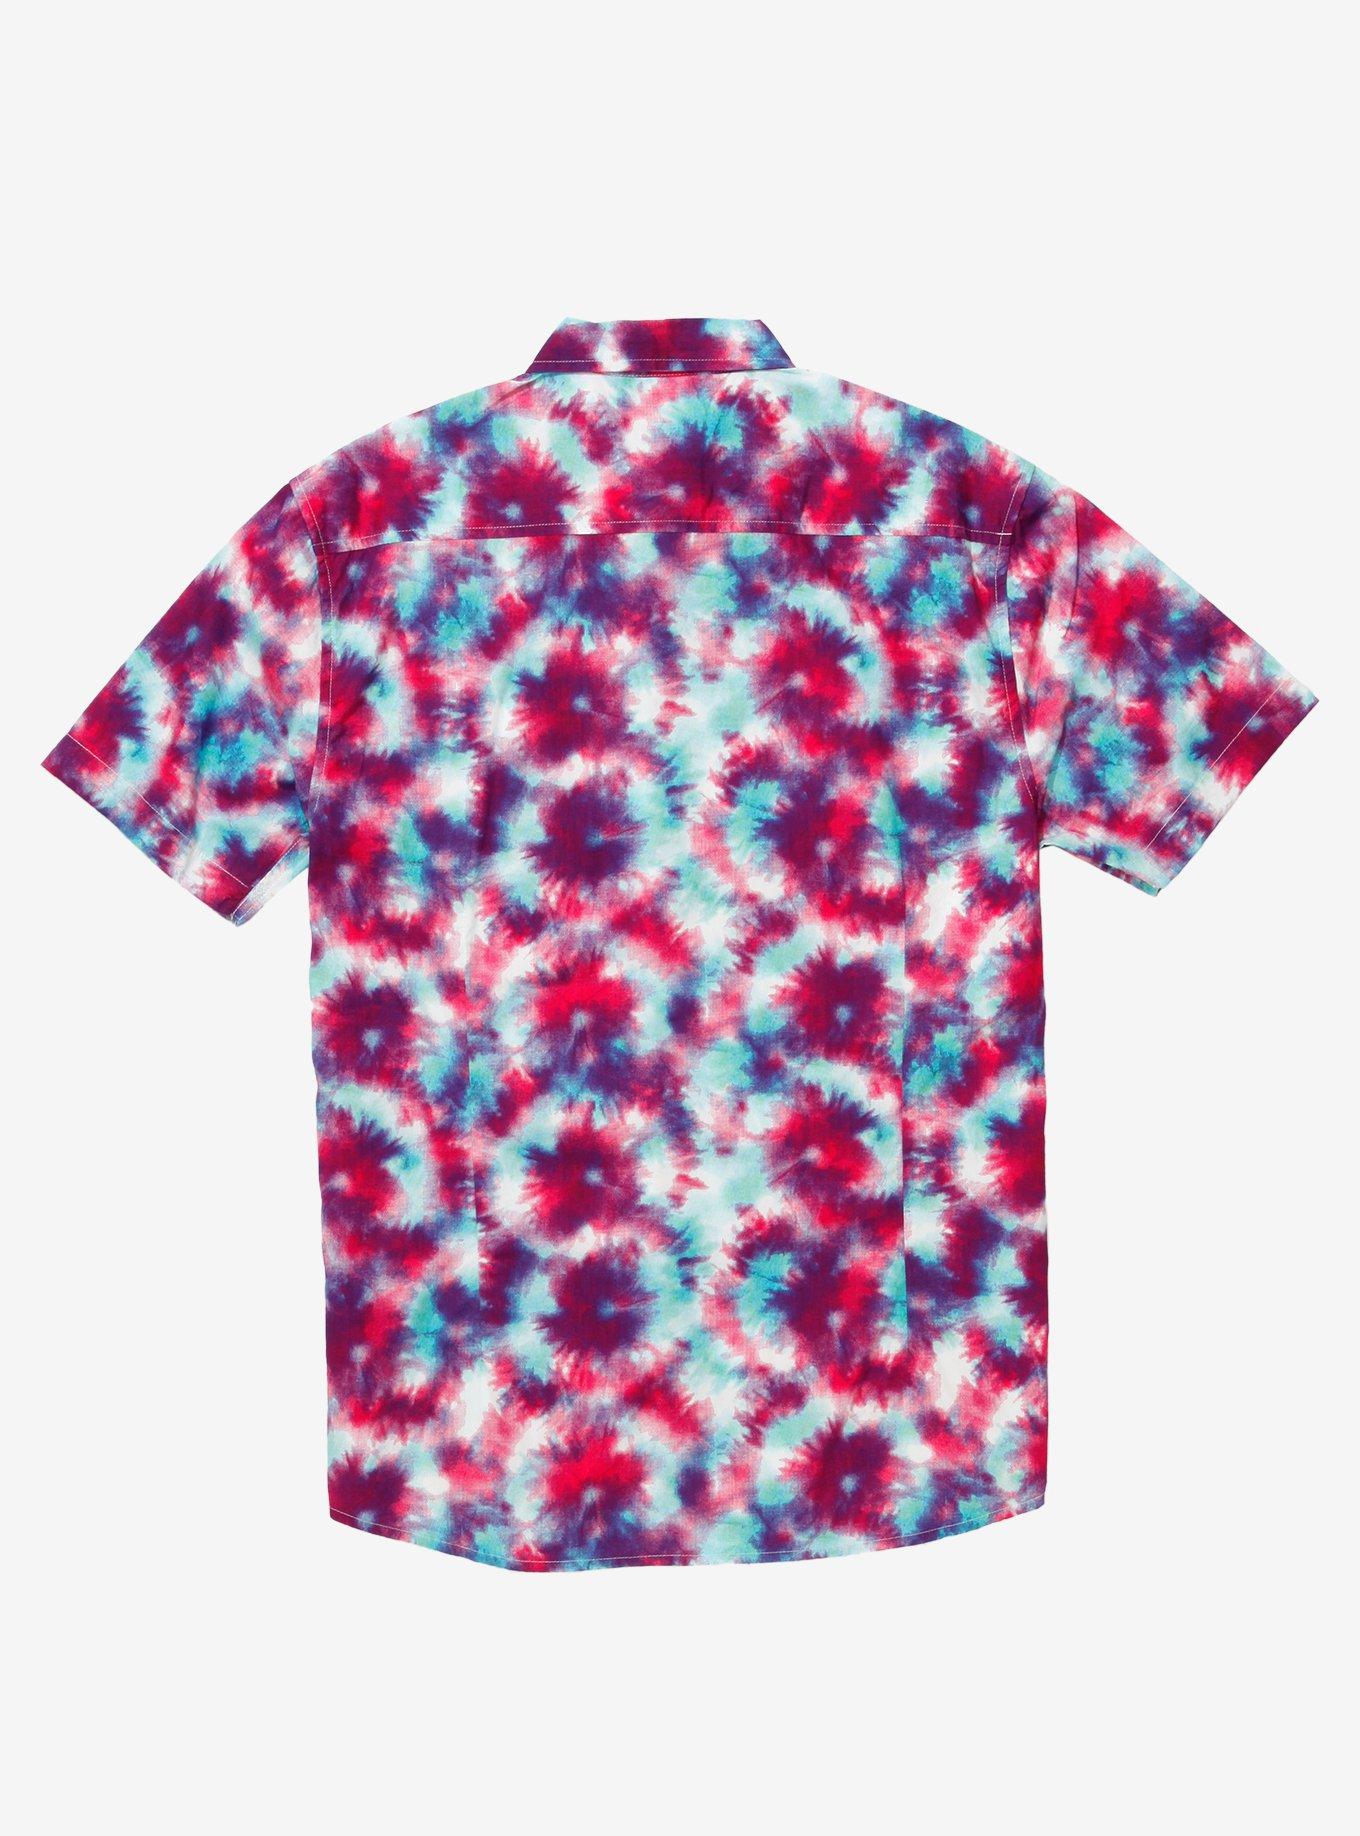 Green & Pink Tie-Dye Woven Button-Up, ABSTRACT, alternate